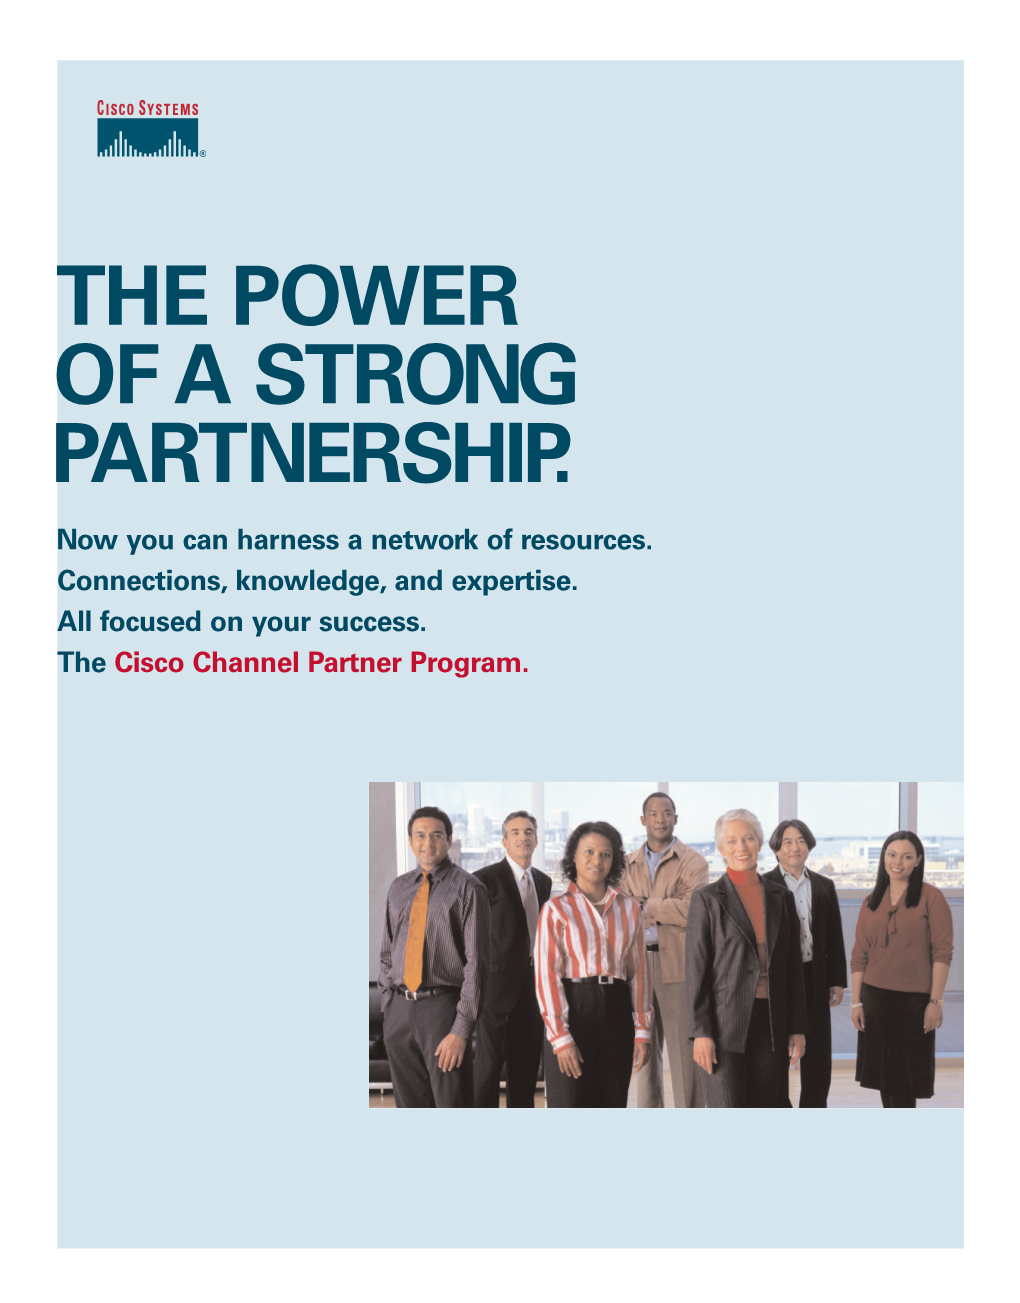 The Power of a Strong Partnership